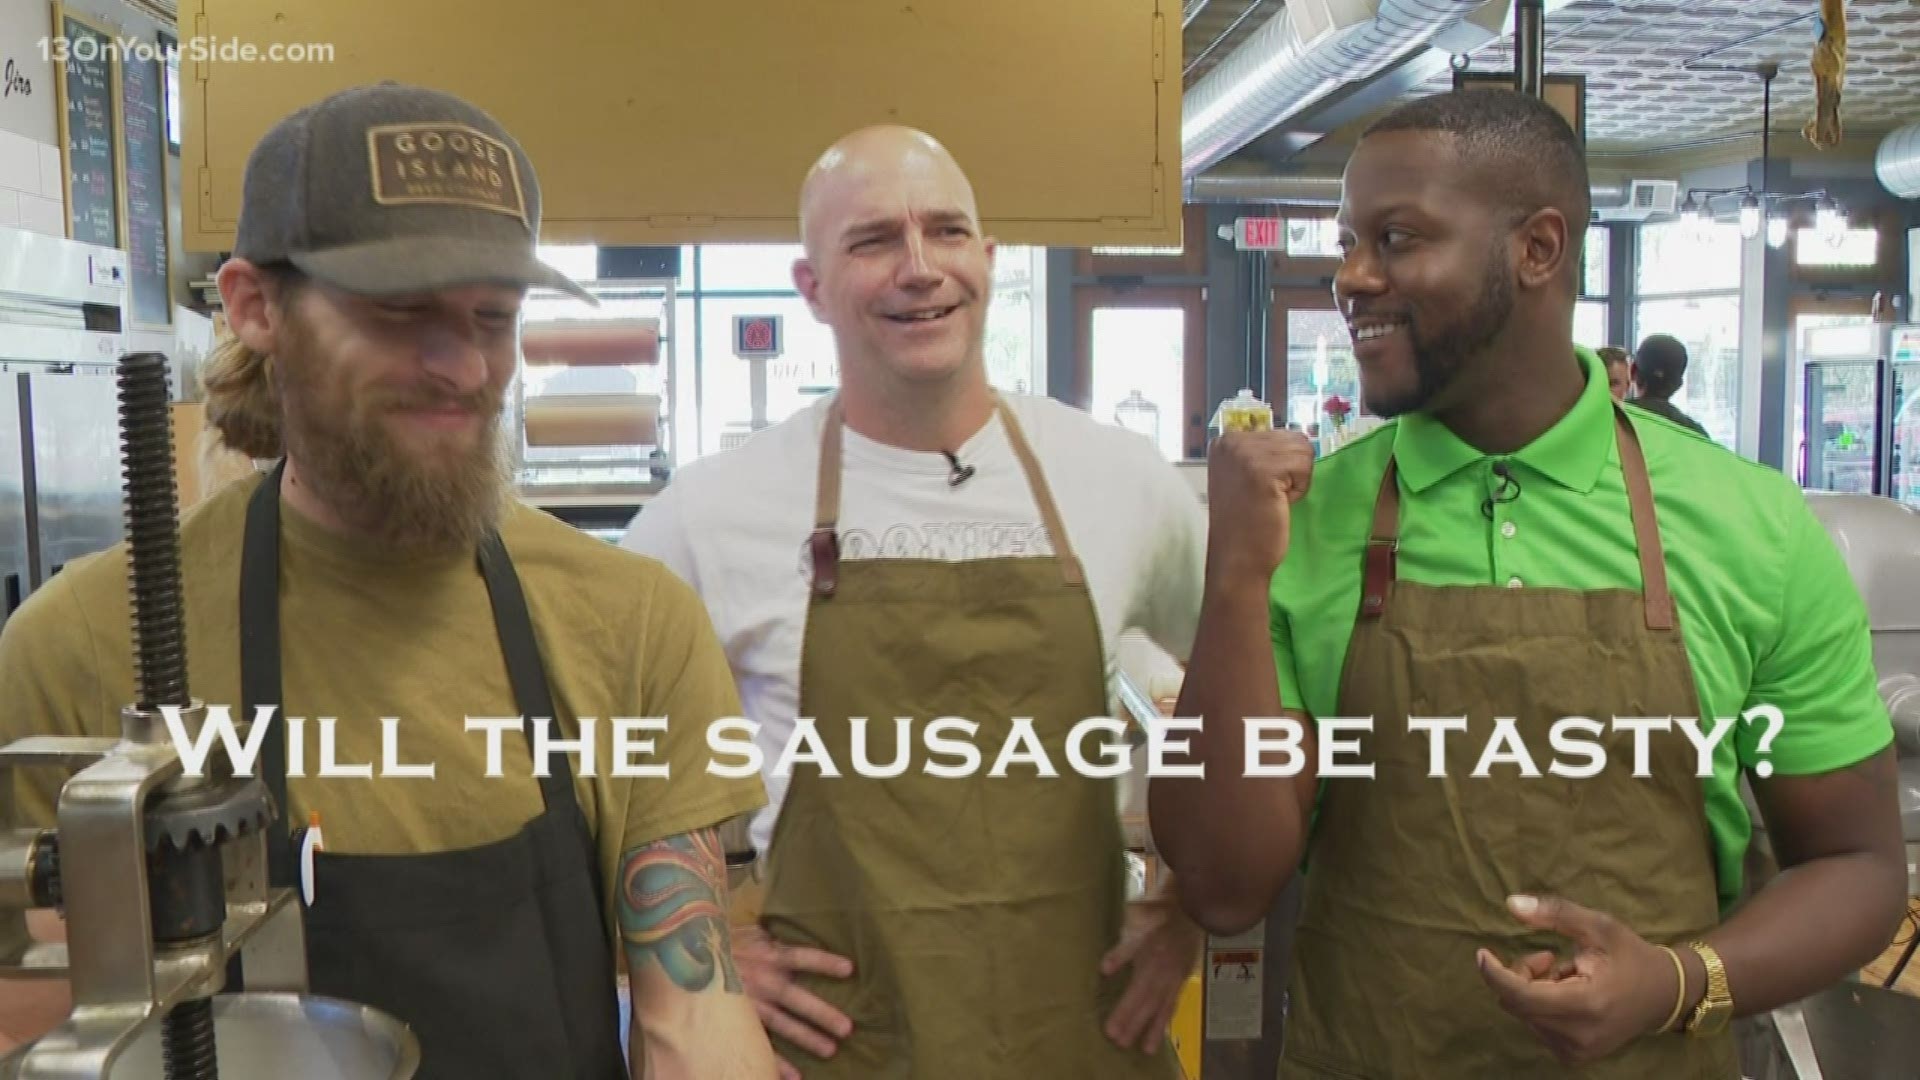 13 ON YOUR SIDE's Jame Starks and Dave Kaechele take on a different challenge this Let's Eat. Check out their adventures at Louise Earl Butcher  in Grand Rapids.